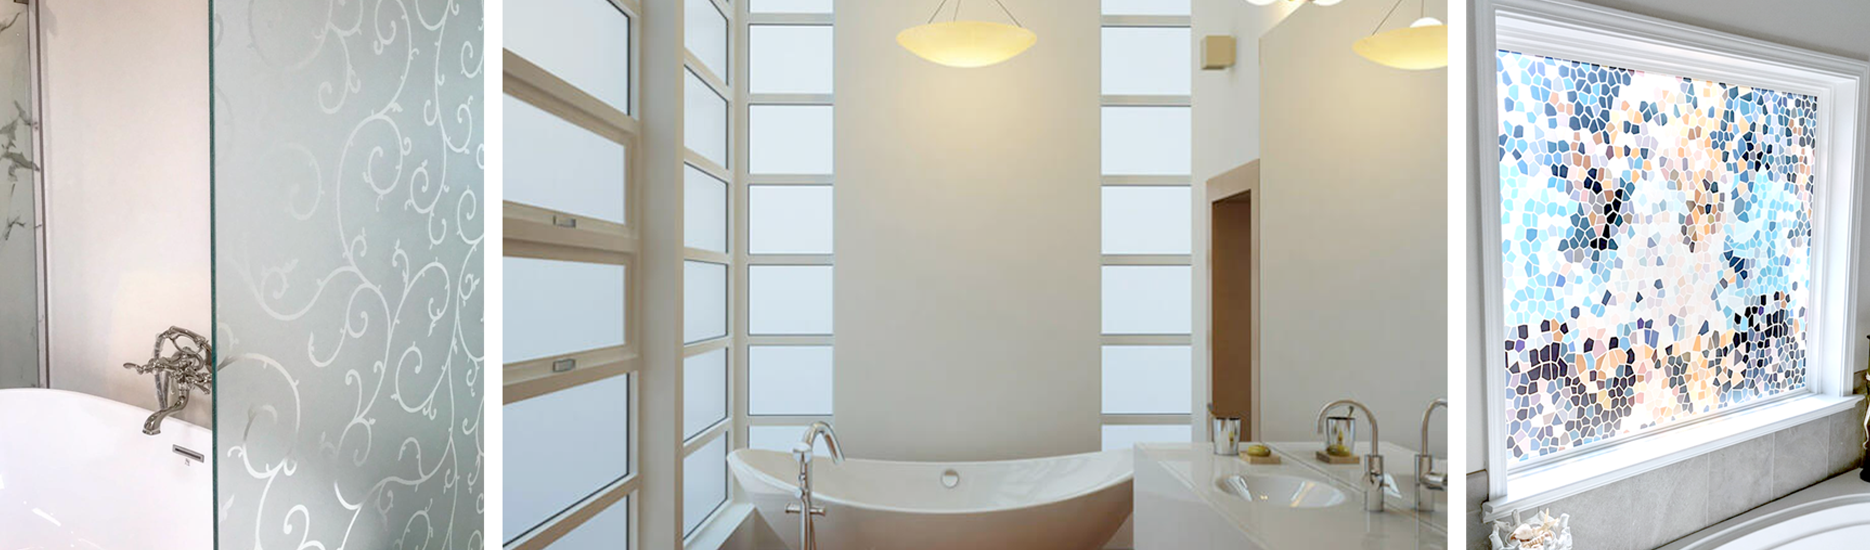 Decorative Privacy Films For Bathroom Windows And Shower Doors Decorative Films